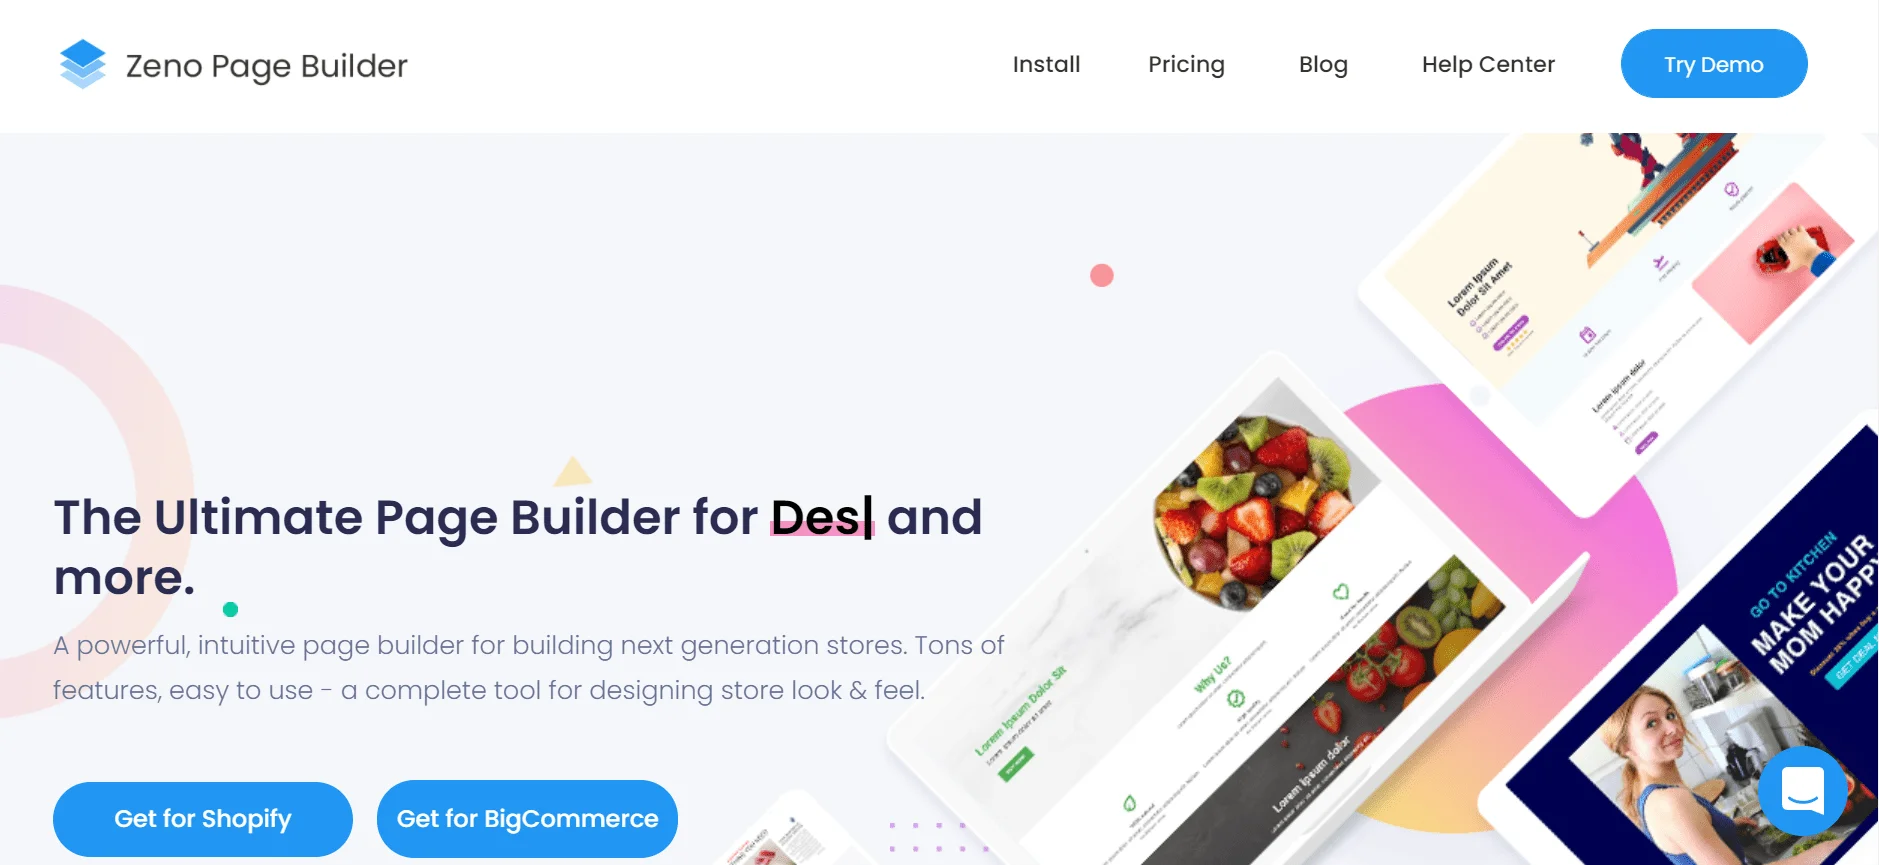 zeno-page-builder-review